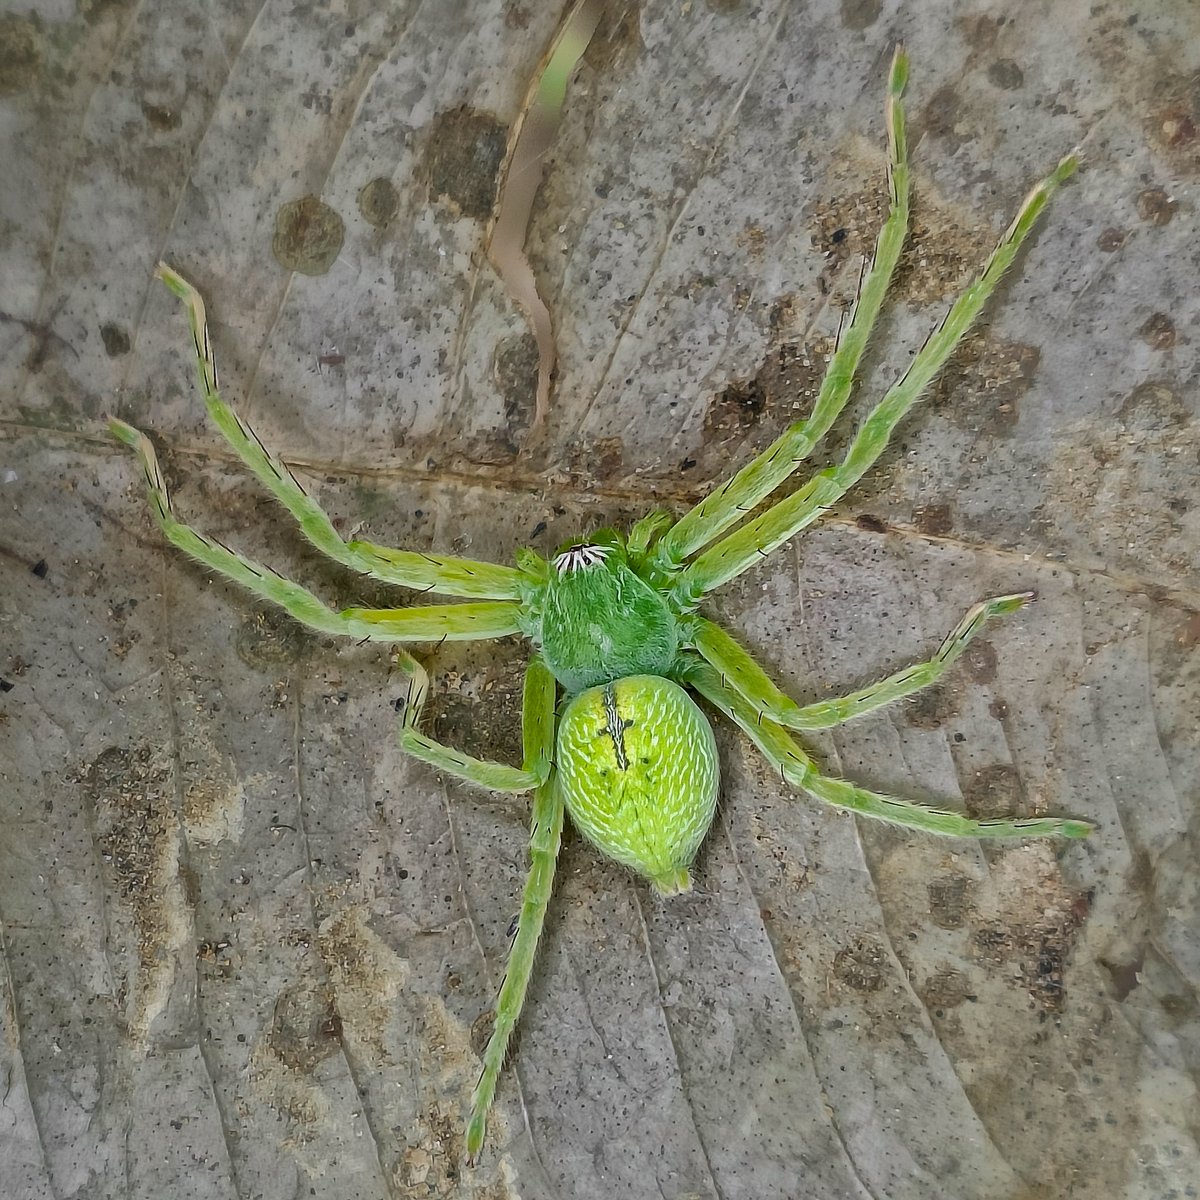 Olios milleti, is a species of spider of the genus Olios commonly called Green Huntsman spider. It is native to India and Sri Lanka 🕷️☘️
#BBCWildlifePOTD #wildlifephotography #NatureBeauty #IndiAves #earthcapture #macrophotography